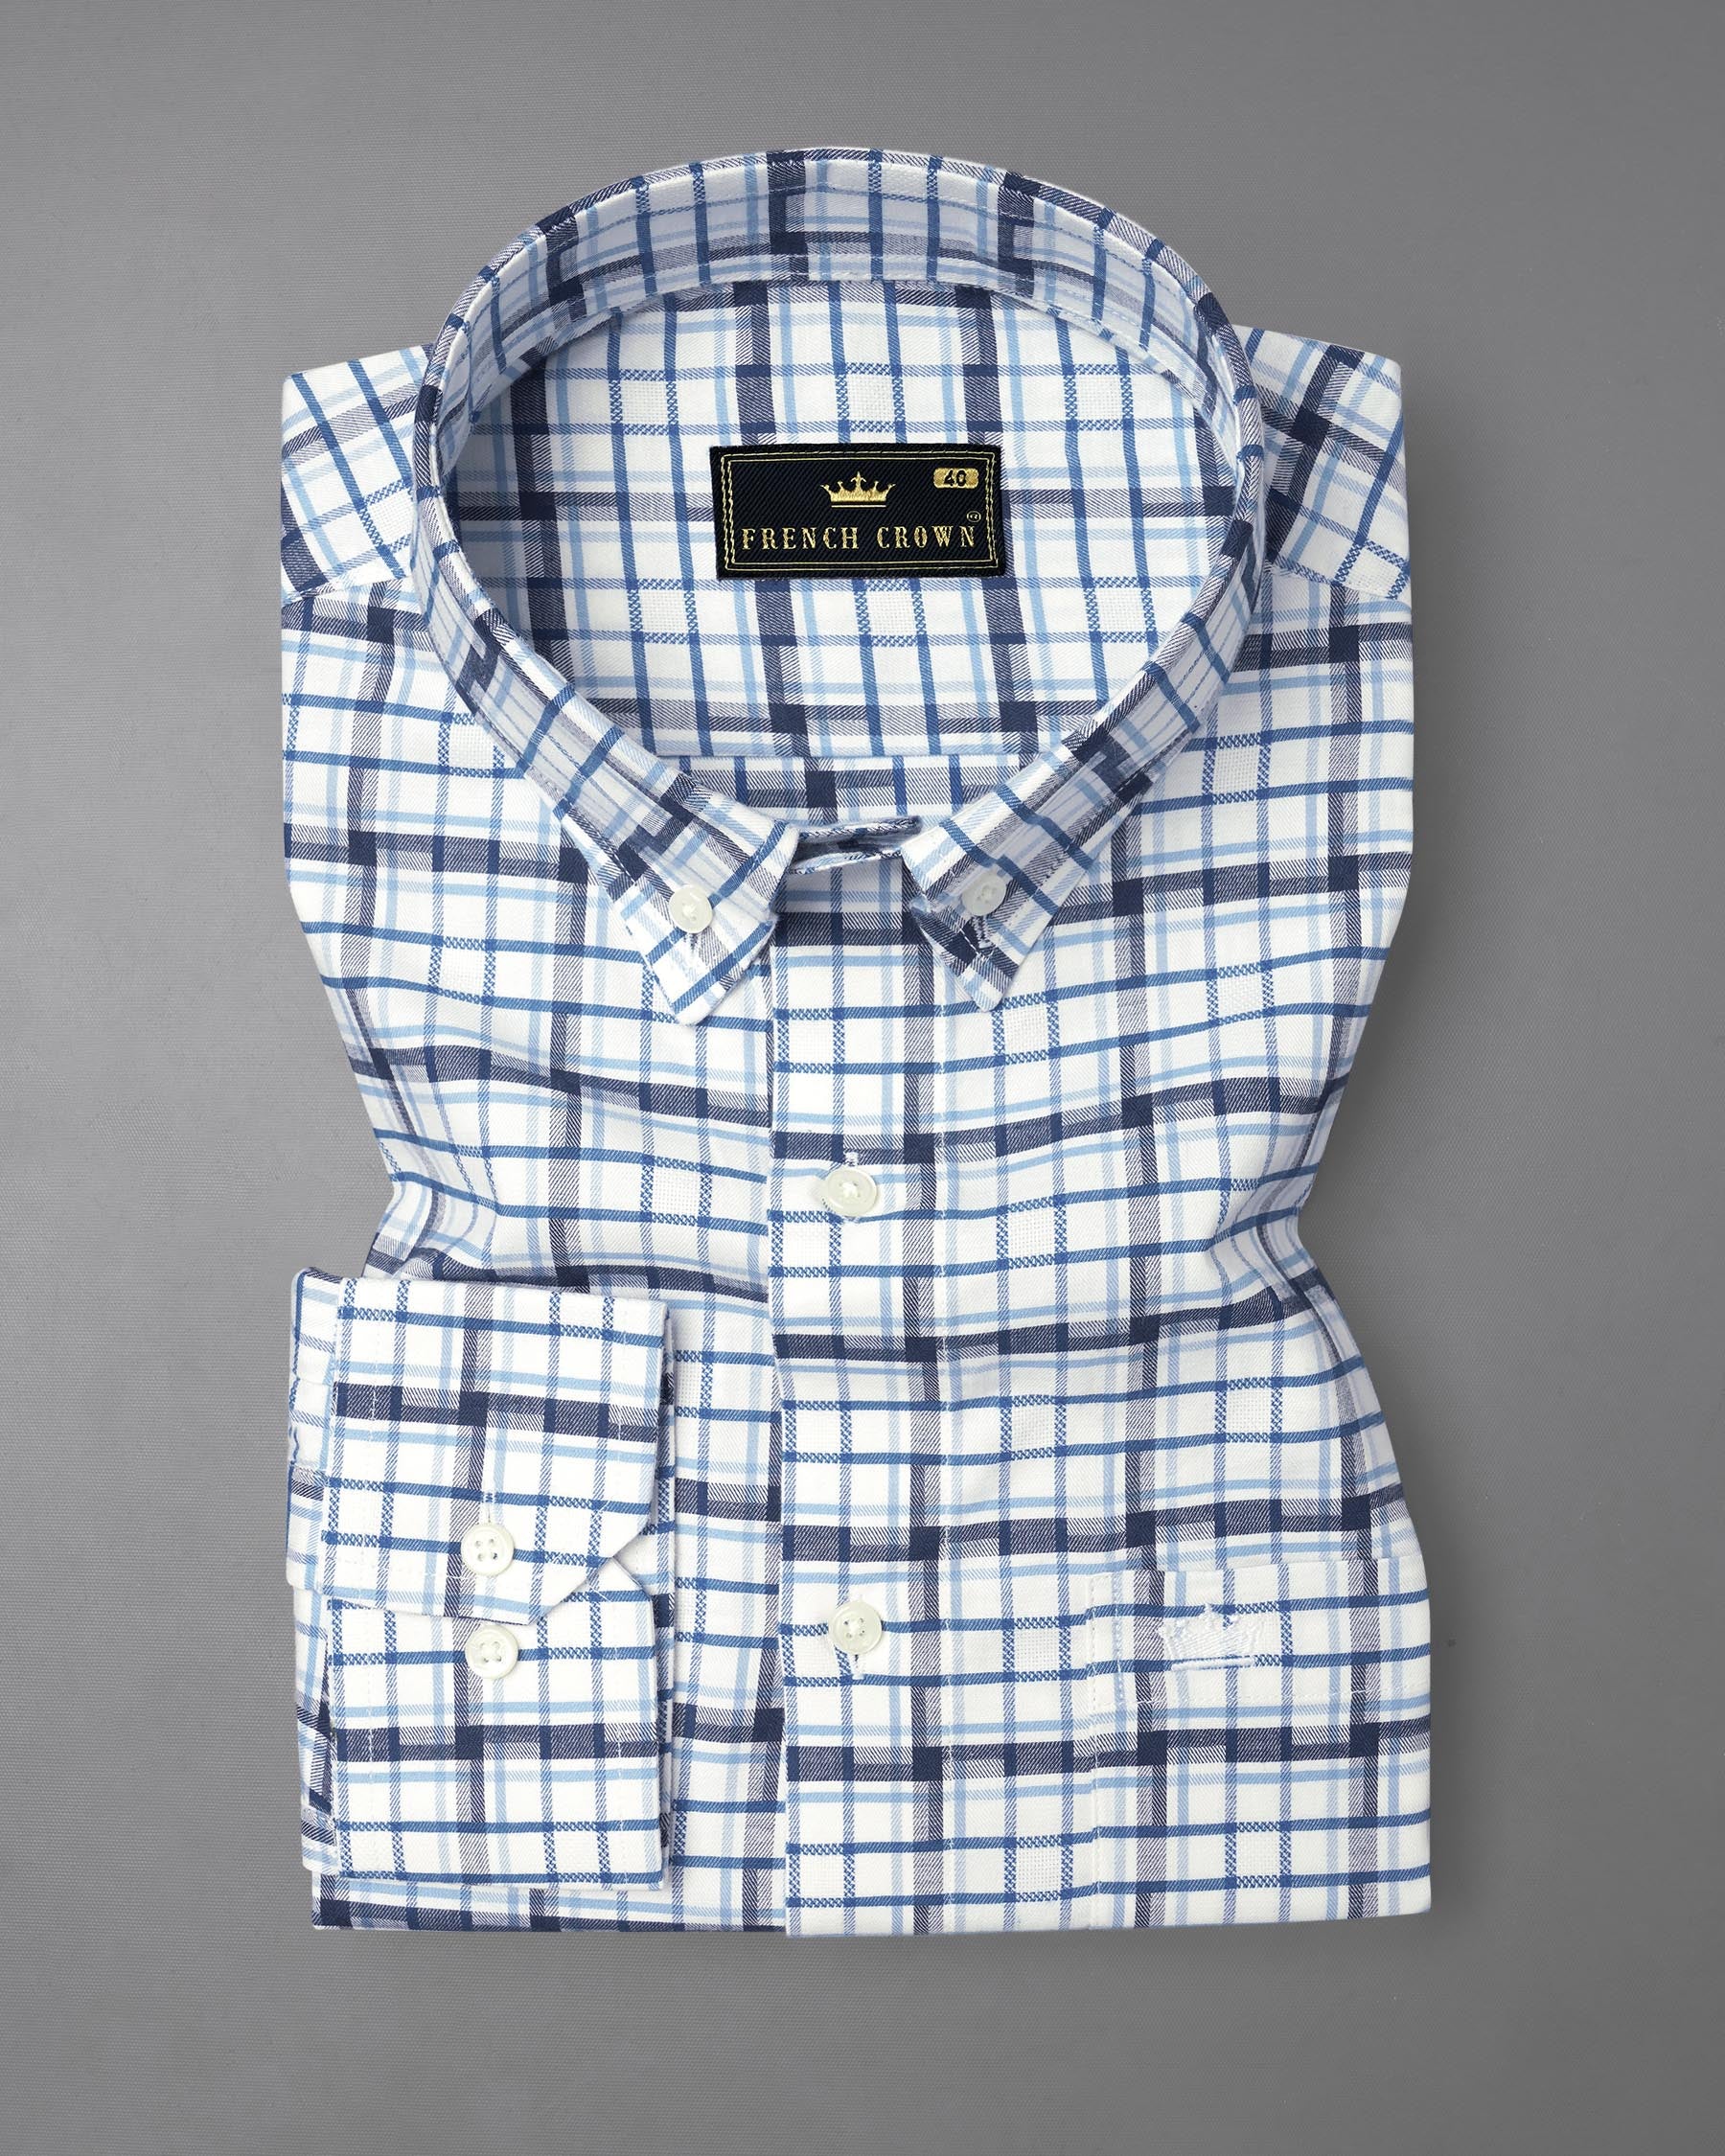 Limed Spruce Navy Blue and Metallic Blue and white Twill Plaid Premium Cotton Shirt 7518-BD-38, 7518-BD-H-38, 7518-BD-39, 7518-BD-H-39, 7518-BD-40, 7518-BD-H-40, 7518-BD-42, 7518-BD-H-42, 7518-BD-44, 7518-BD-H-44, 7518-BD-46, 7518-BD-H-46, 7518-BD-48, 7518-BD-H-48, 7518-BD-50, 7518-BD-H-50, 7518-BD-52, 7518-BD-H-52